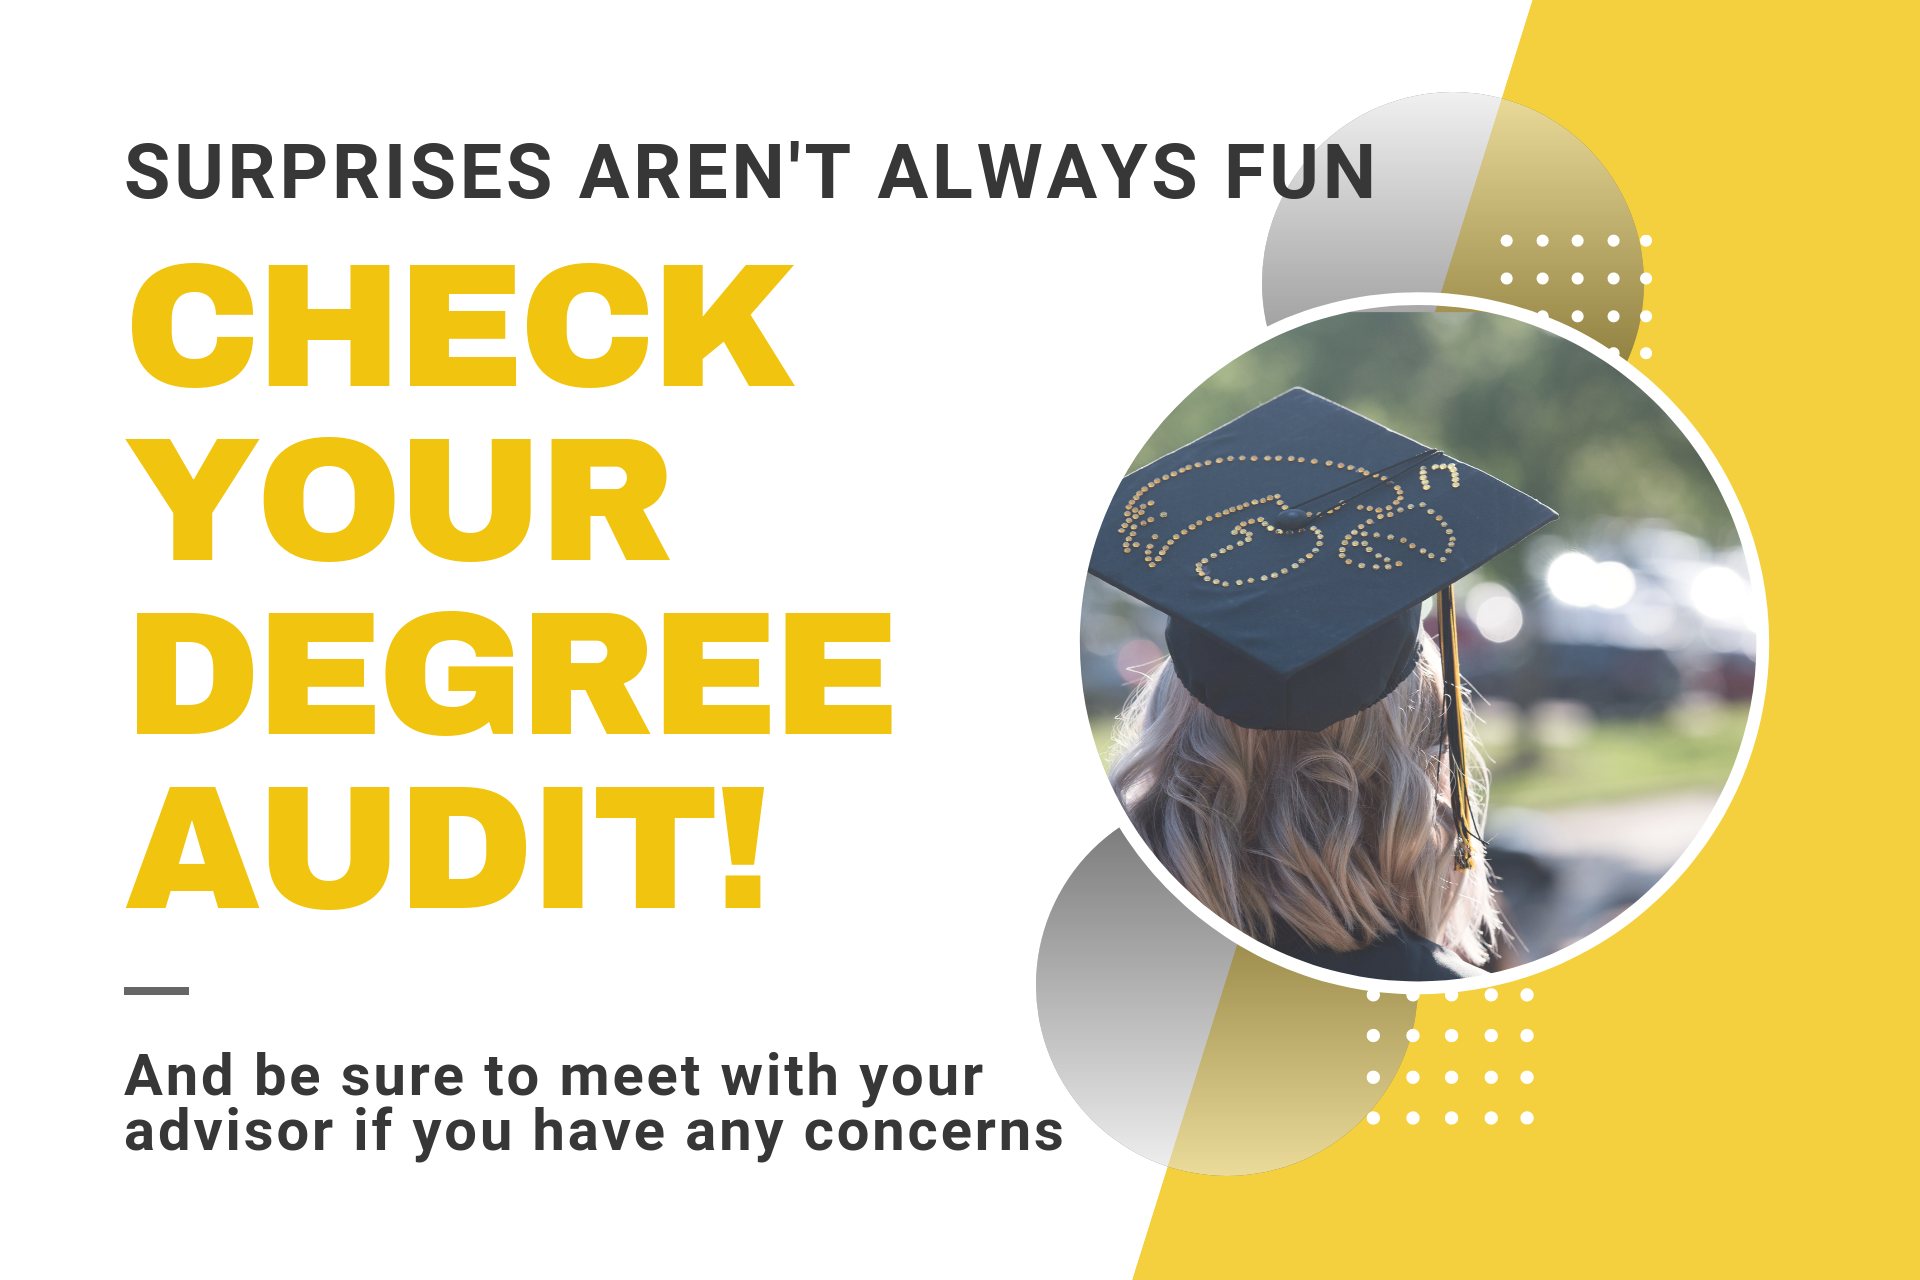 Check your audit